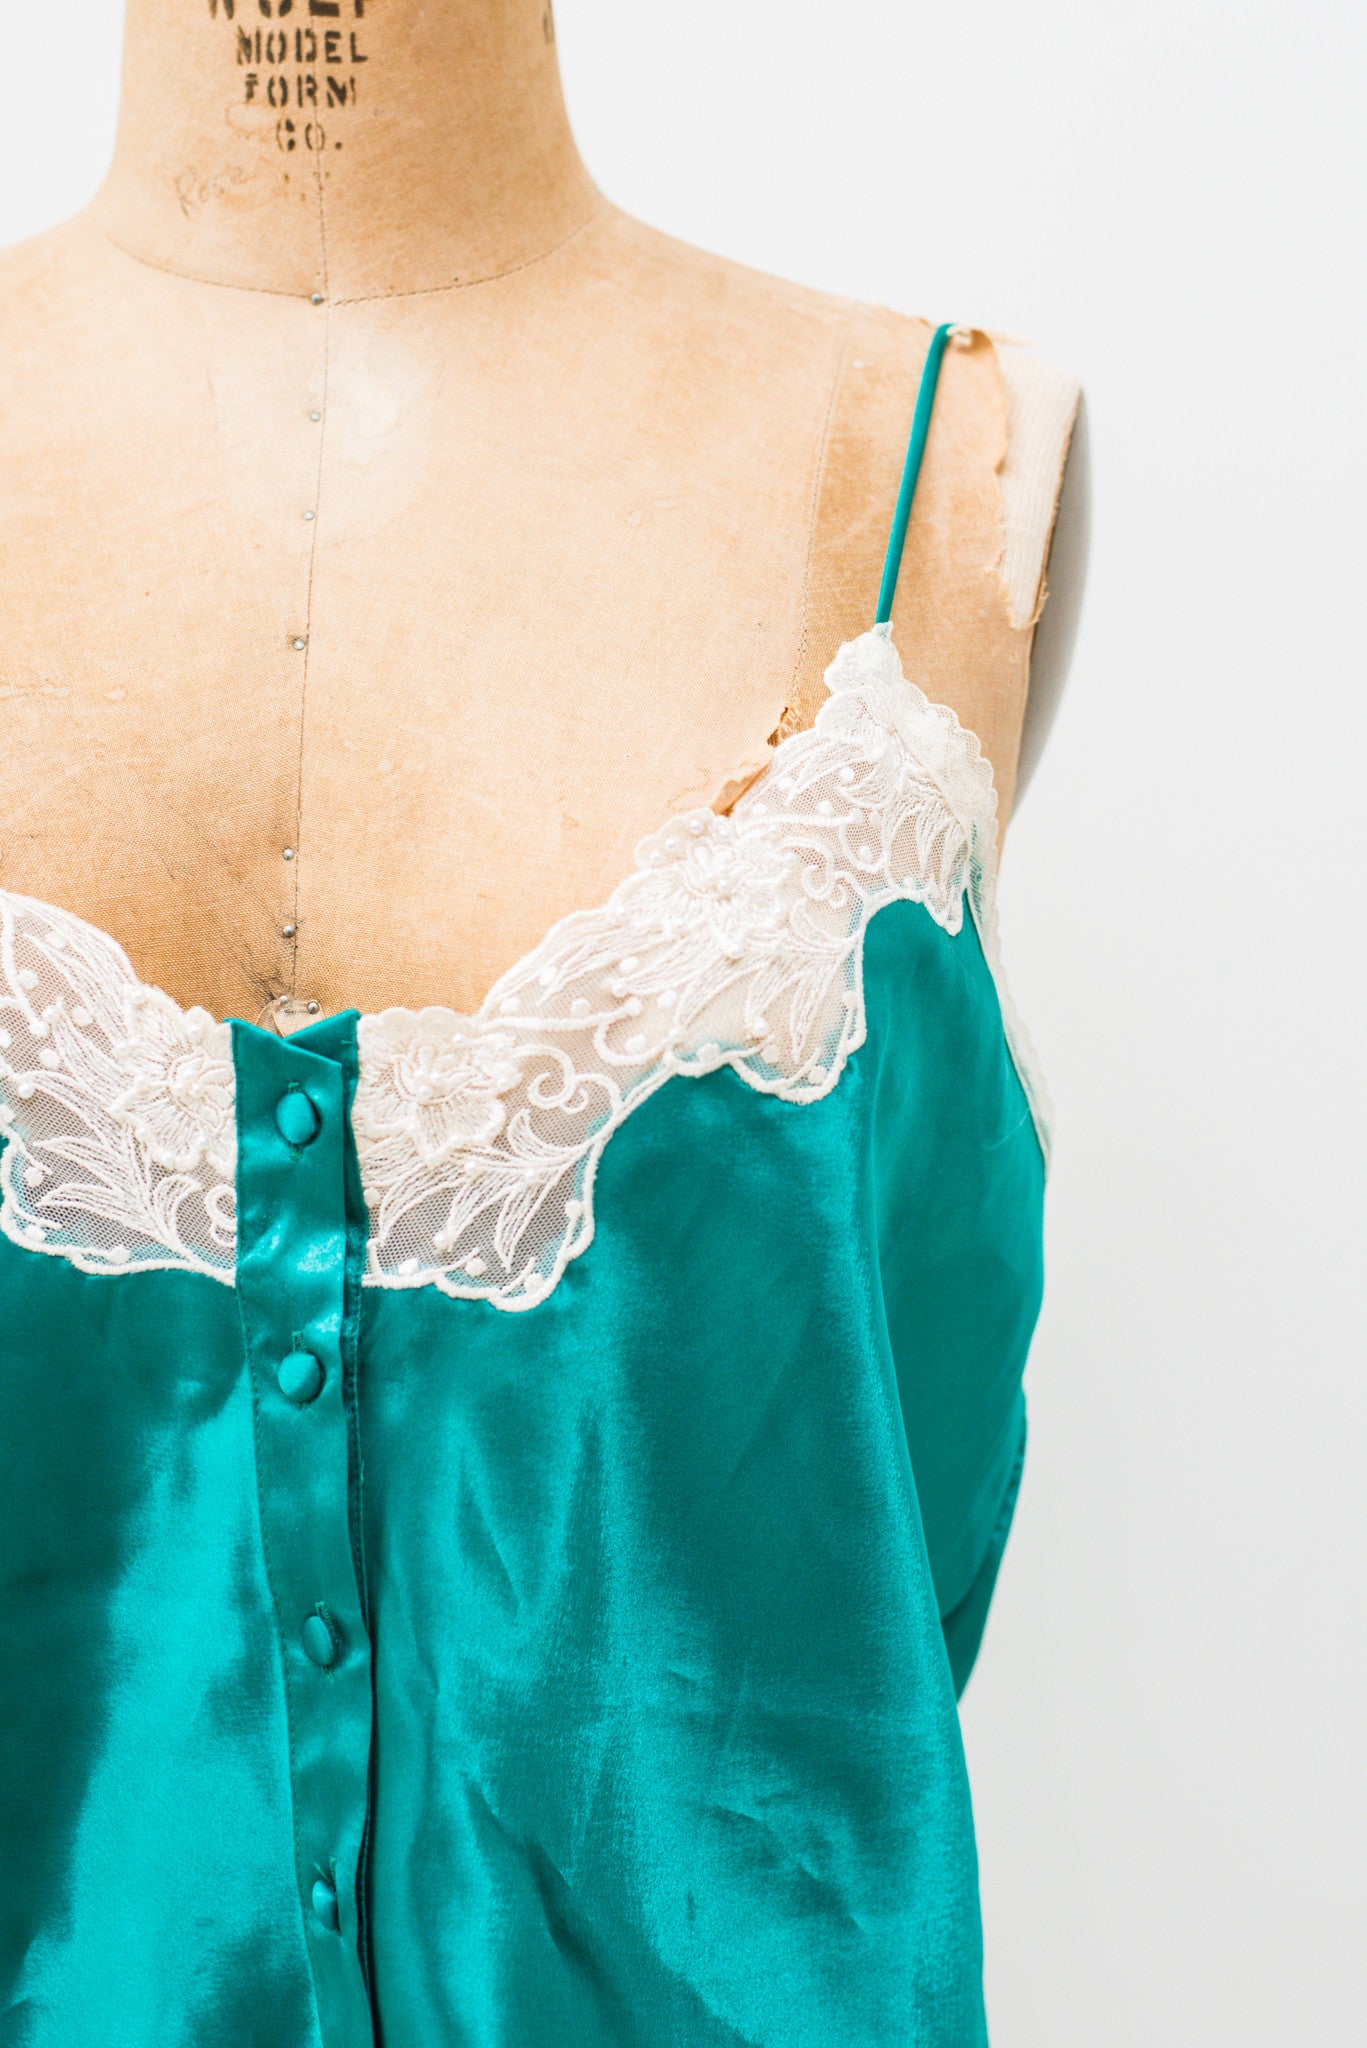 1980s Green Satin and Lace Top - L